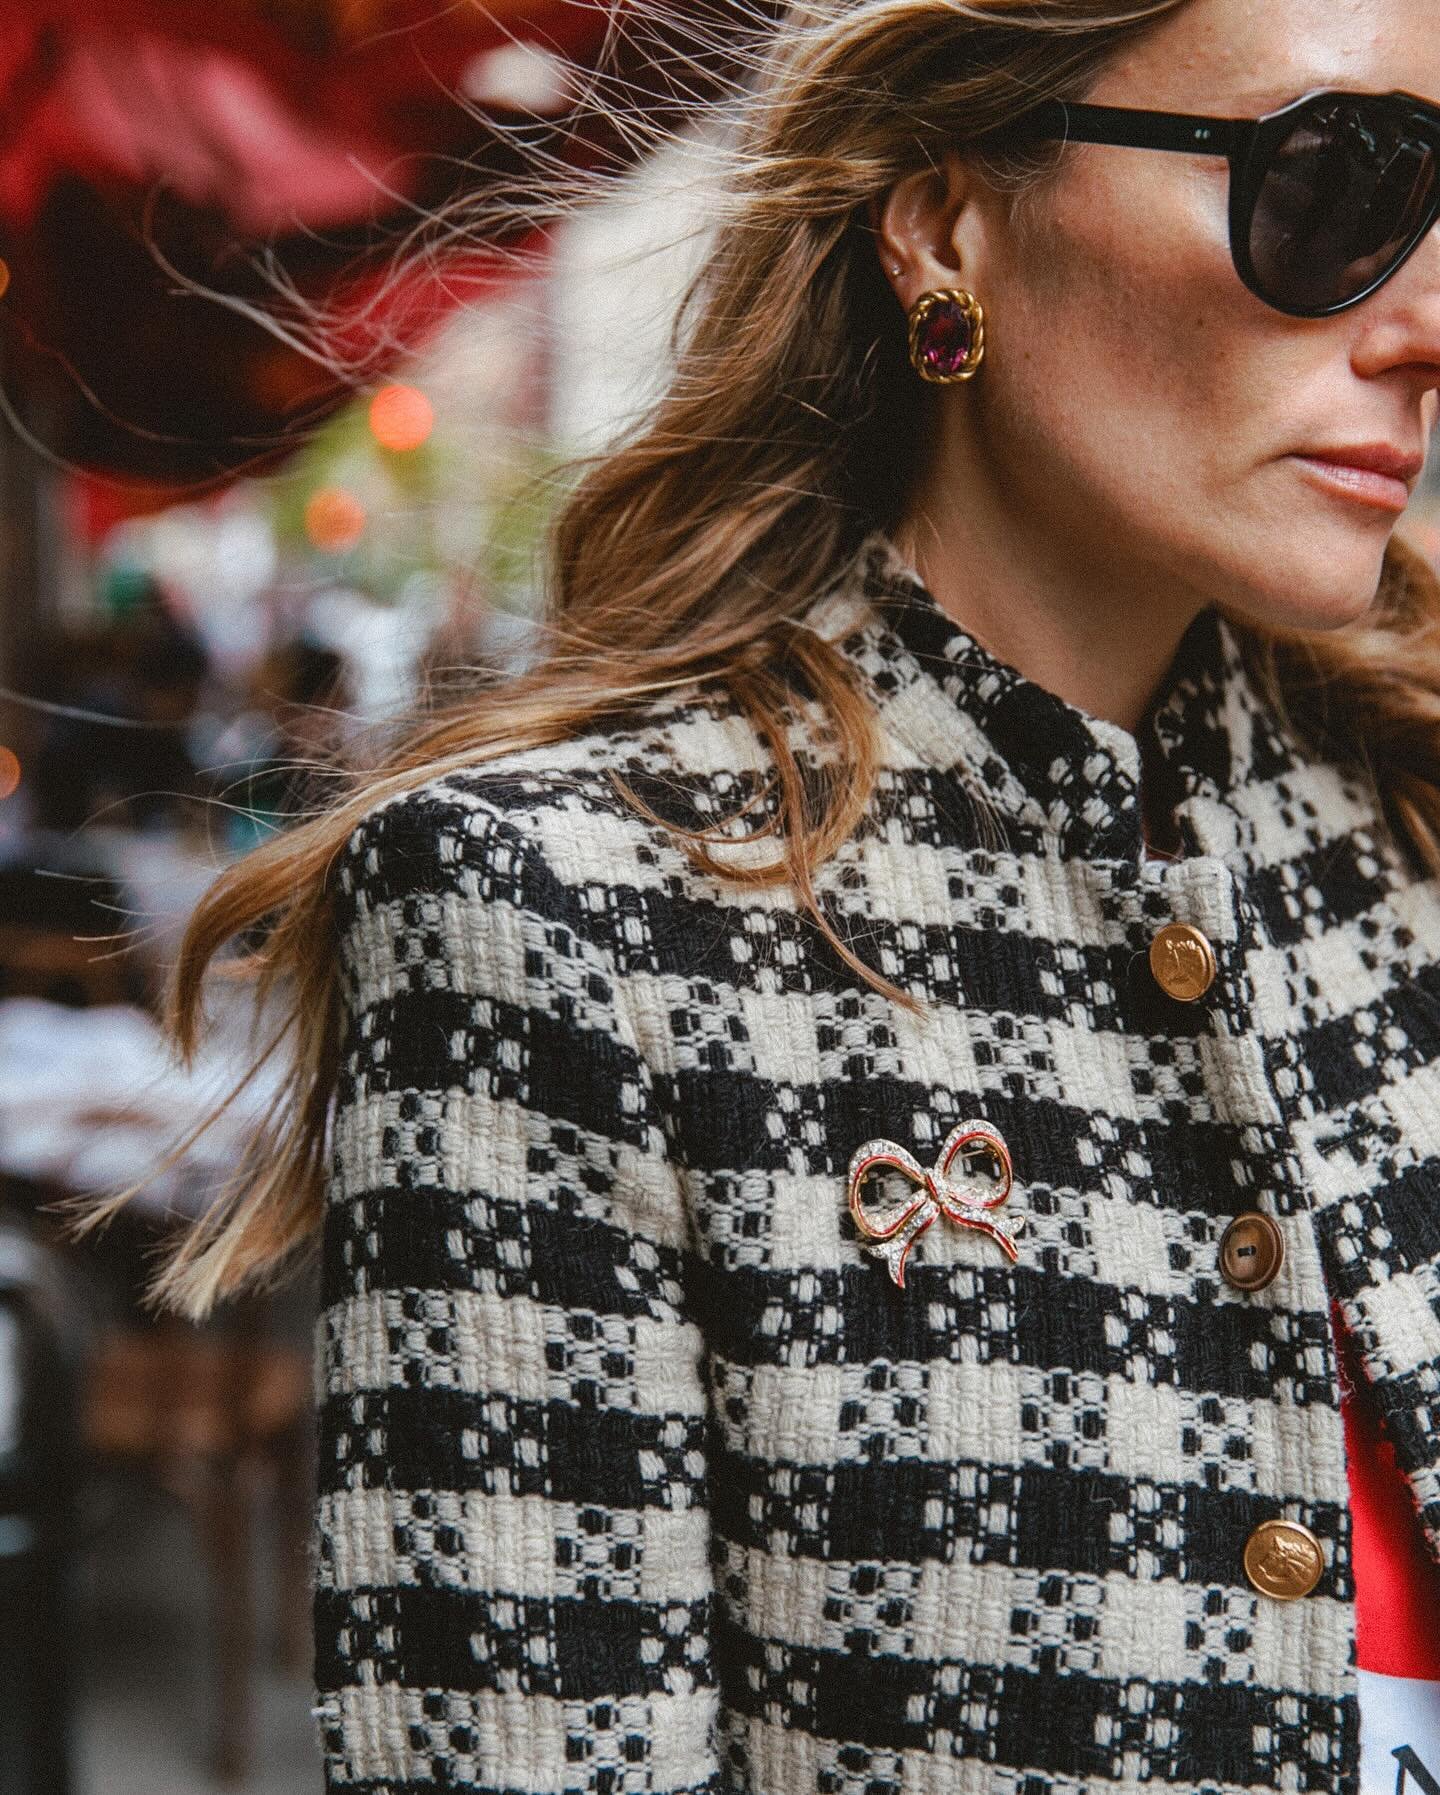 Liz Toney (@lizgreytoney) in our Wool Boucle Jacket (available made-to-order), accessorized with a vintage bow brooch, vintage Celine earrings, and our aviator sunglass.